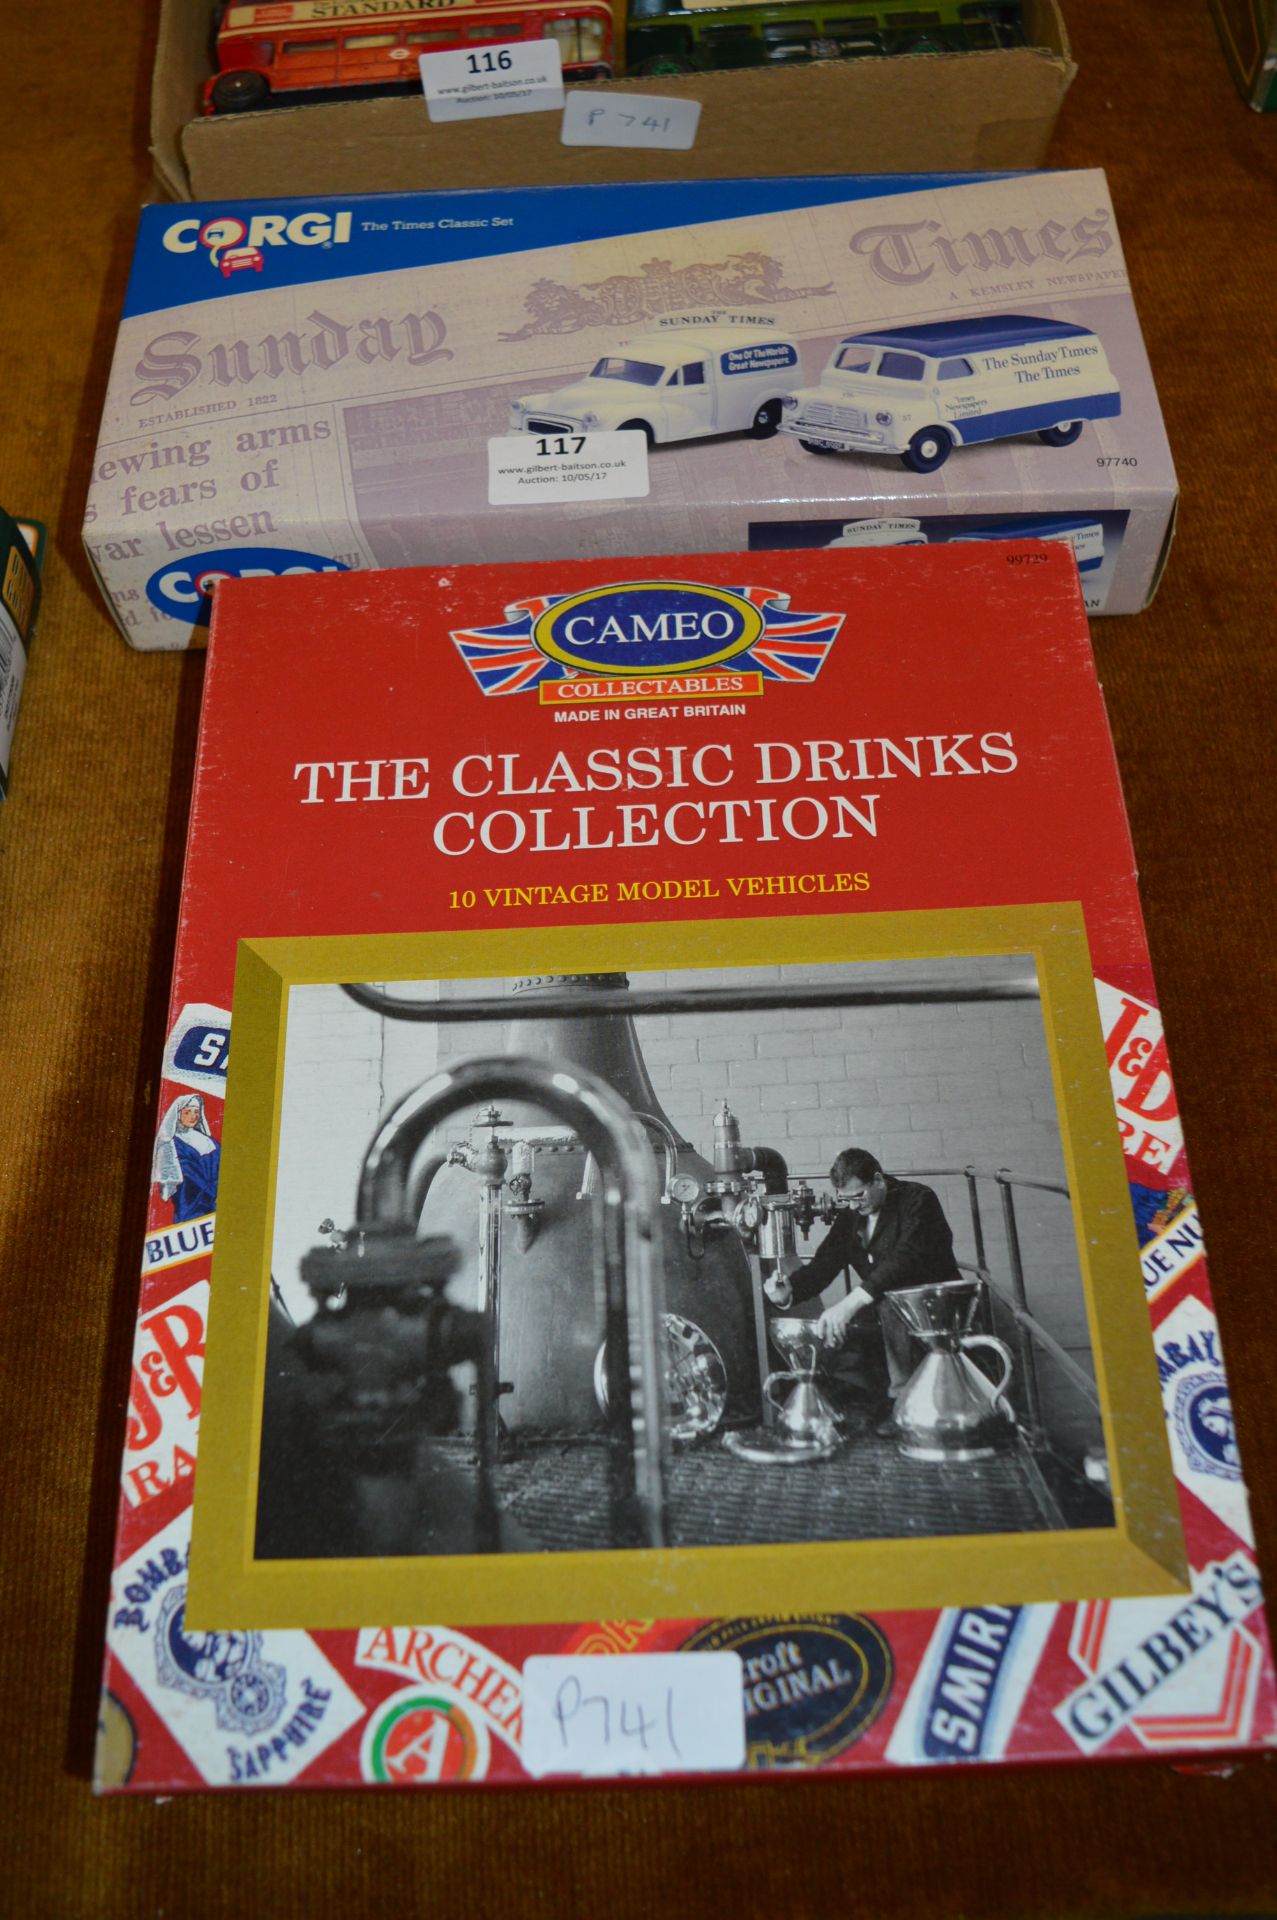 Corgi Sunday Times Vehicles and Cameo Collectables "Classic Drinks Collection" Vehicles